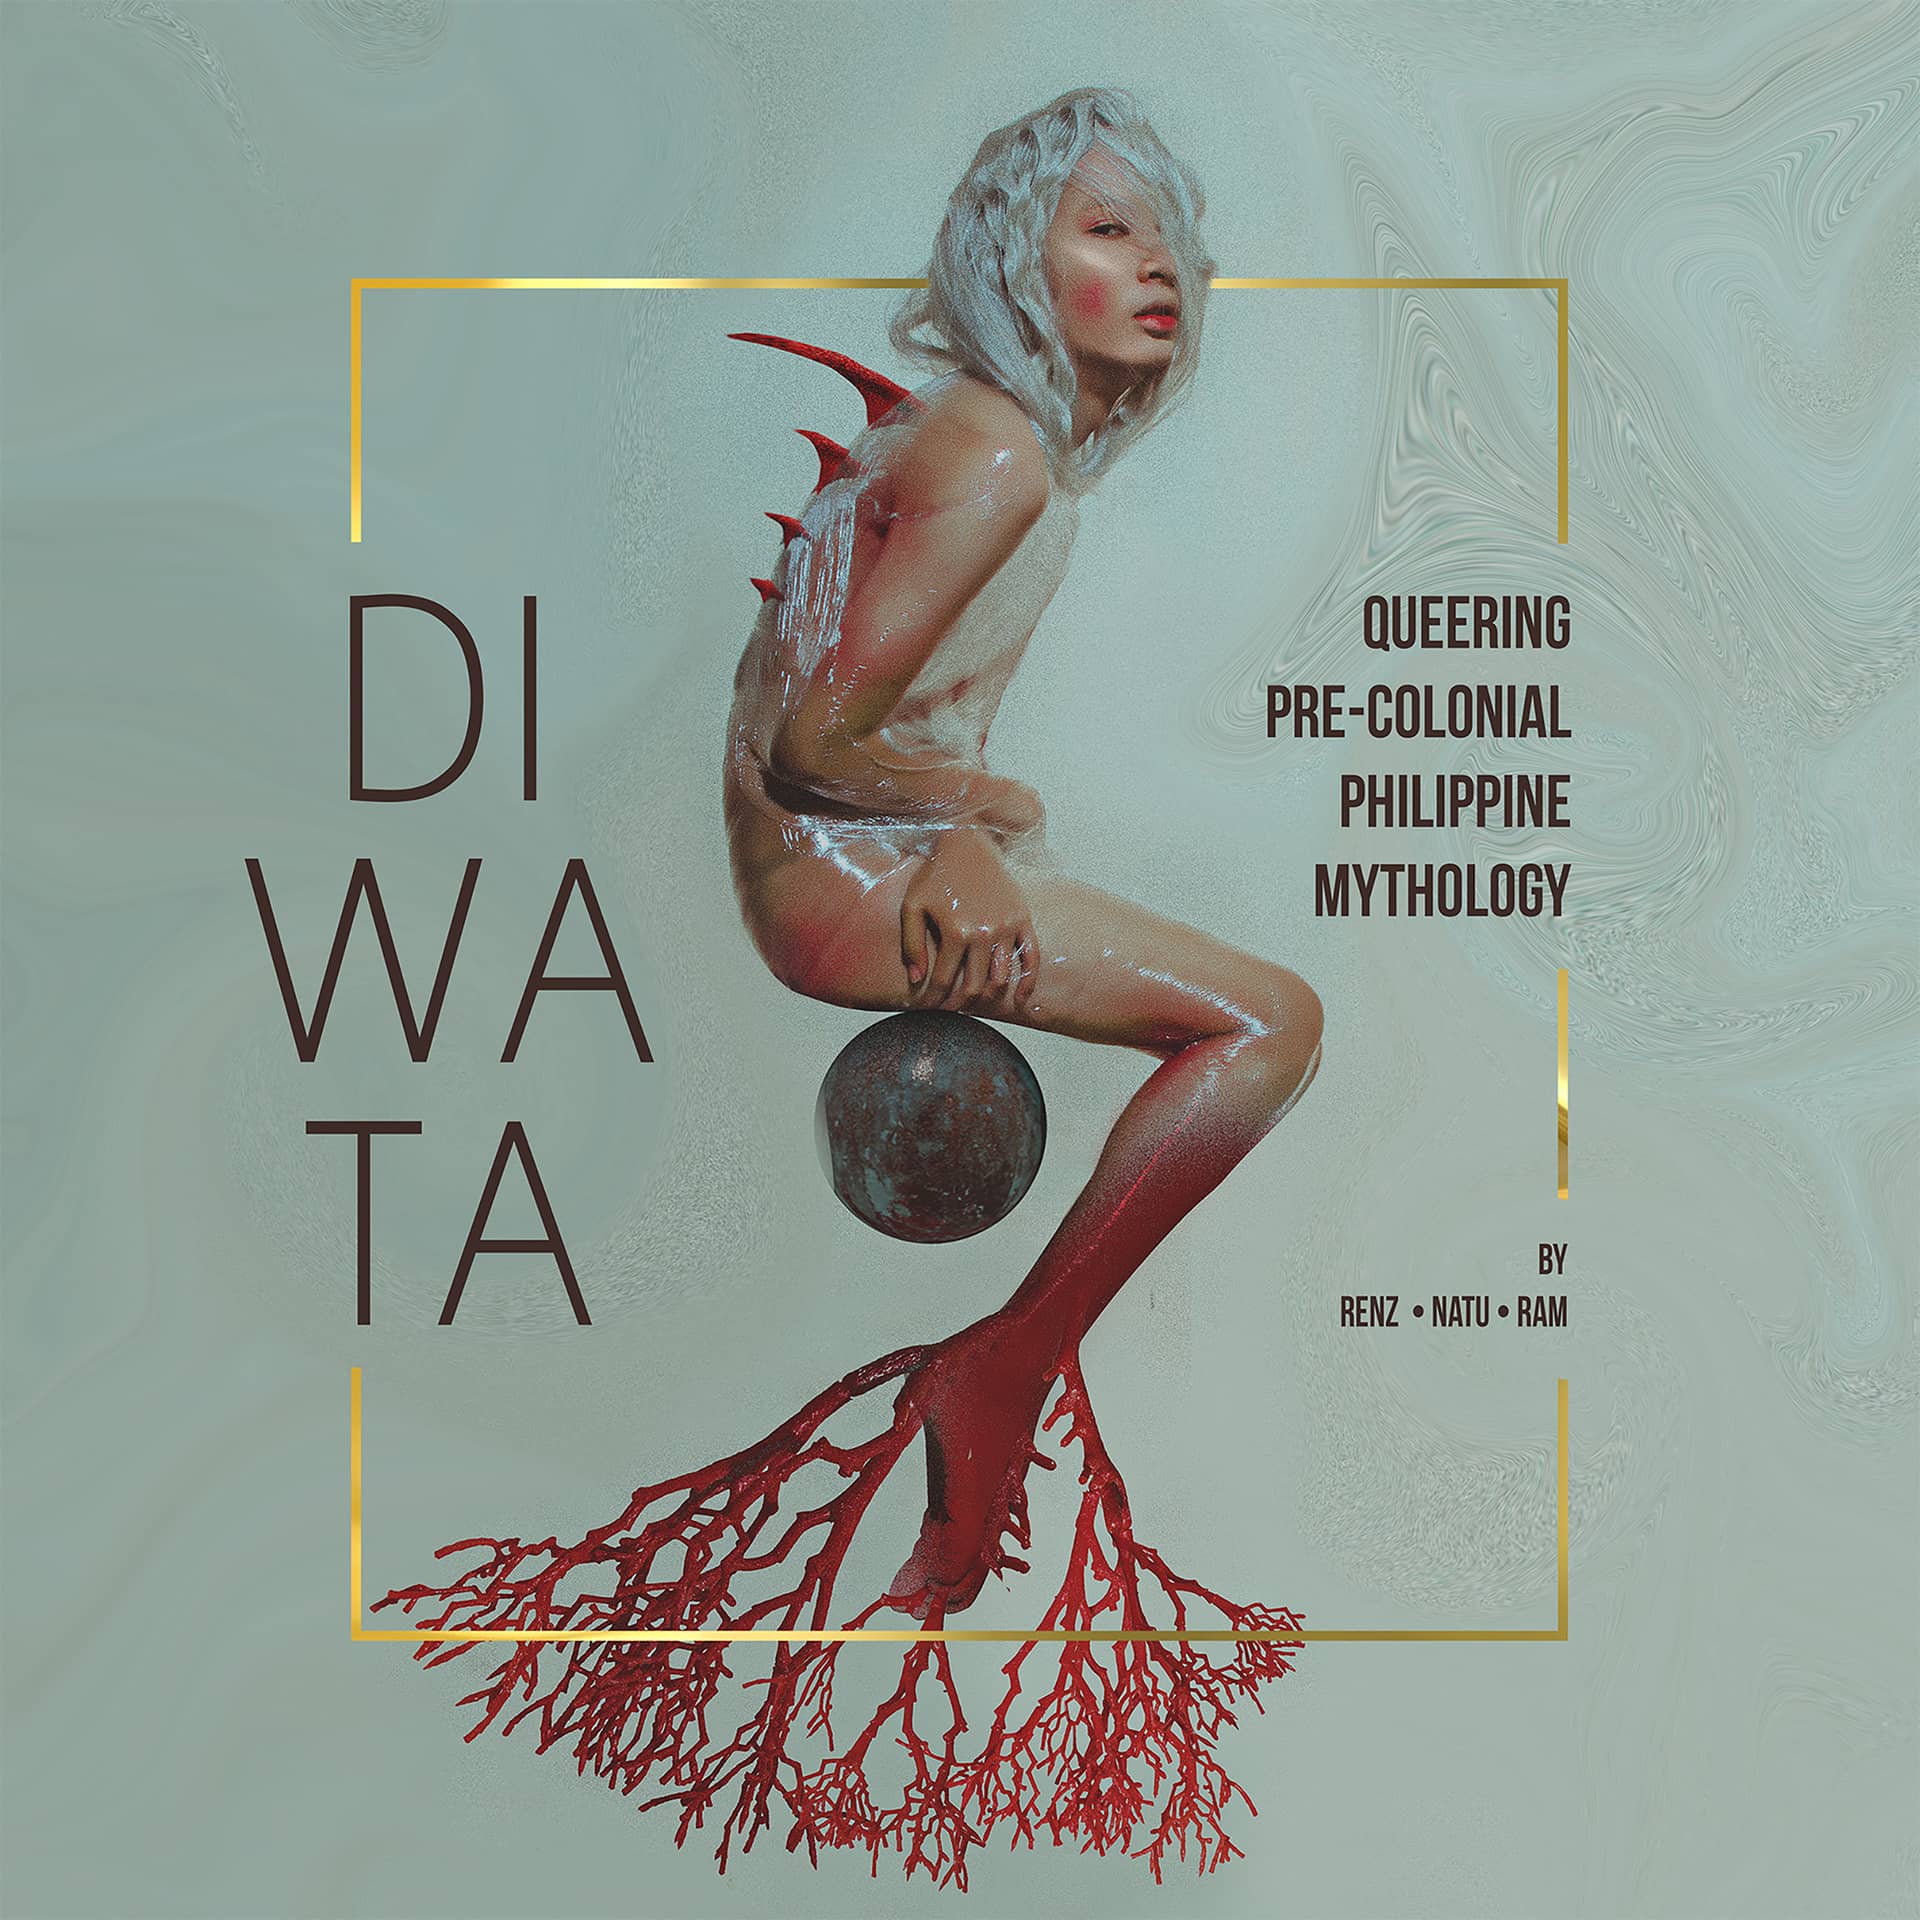 Diwata Poster, a mythical creature with fins on its back and red corals that look like arteries on its feet